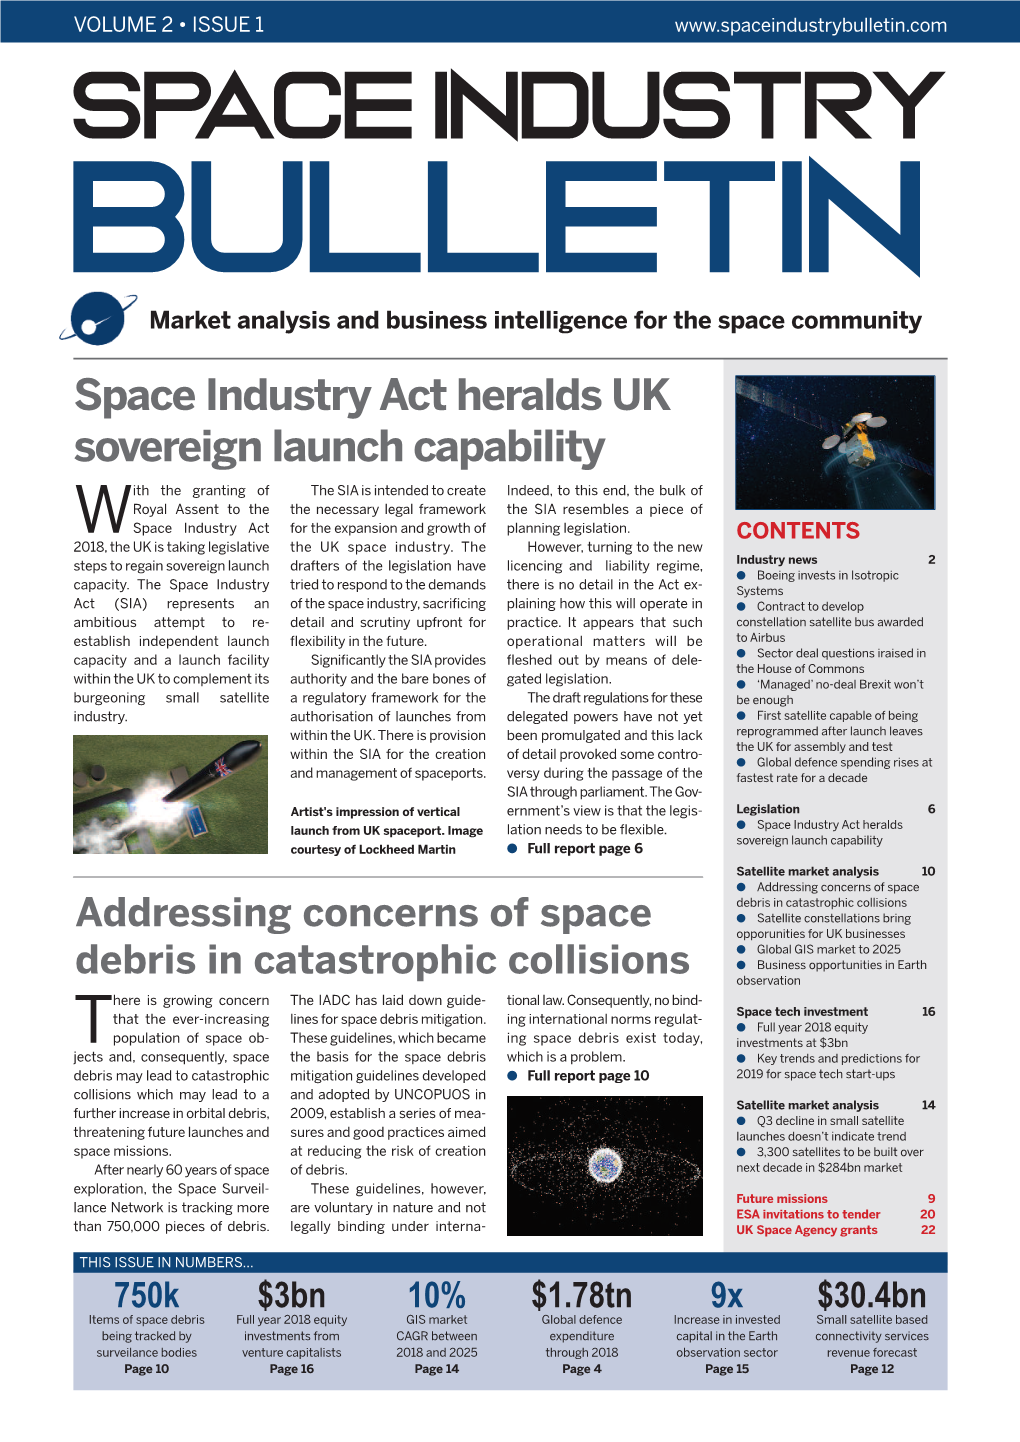 Space Industry Bulletin January 2019